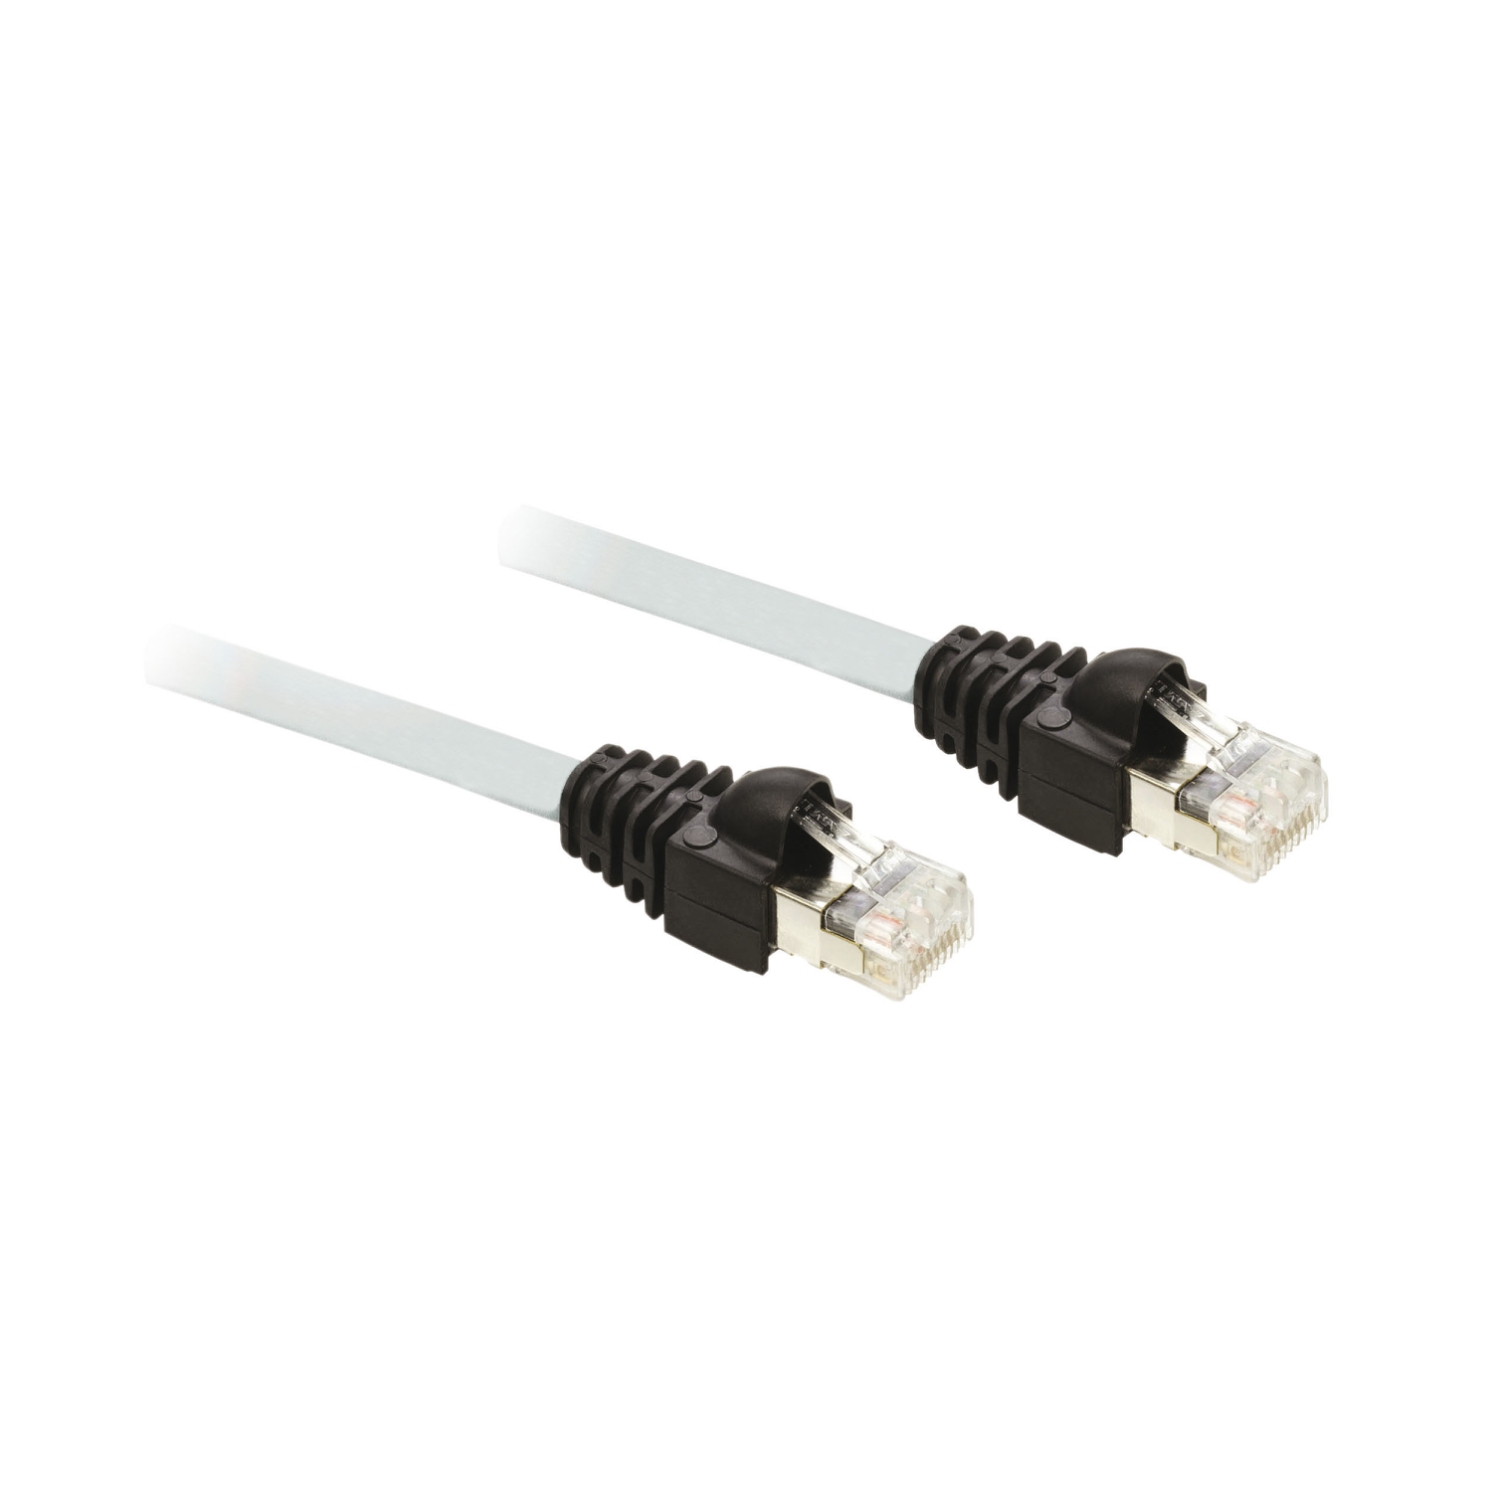 Ethernet ConneXium shielded twisted pair straight cord-5m-2connectorsRJ45-UL/CSA